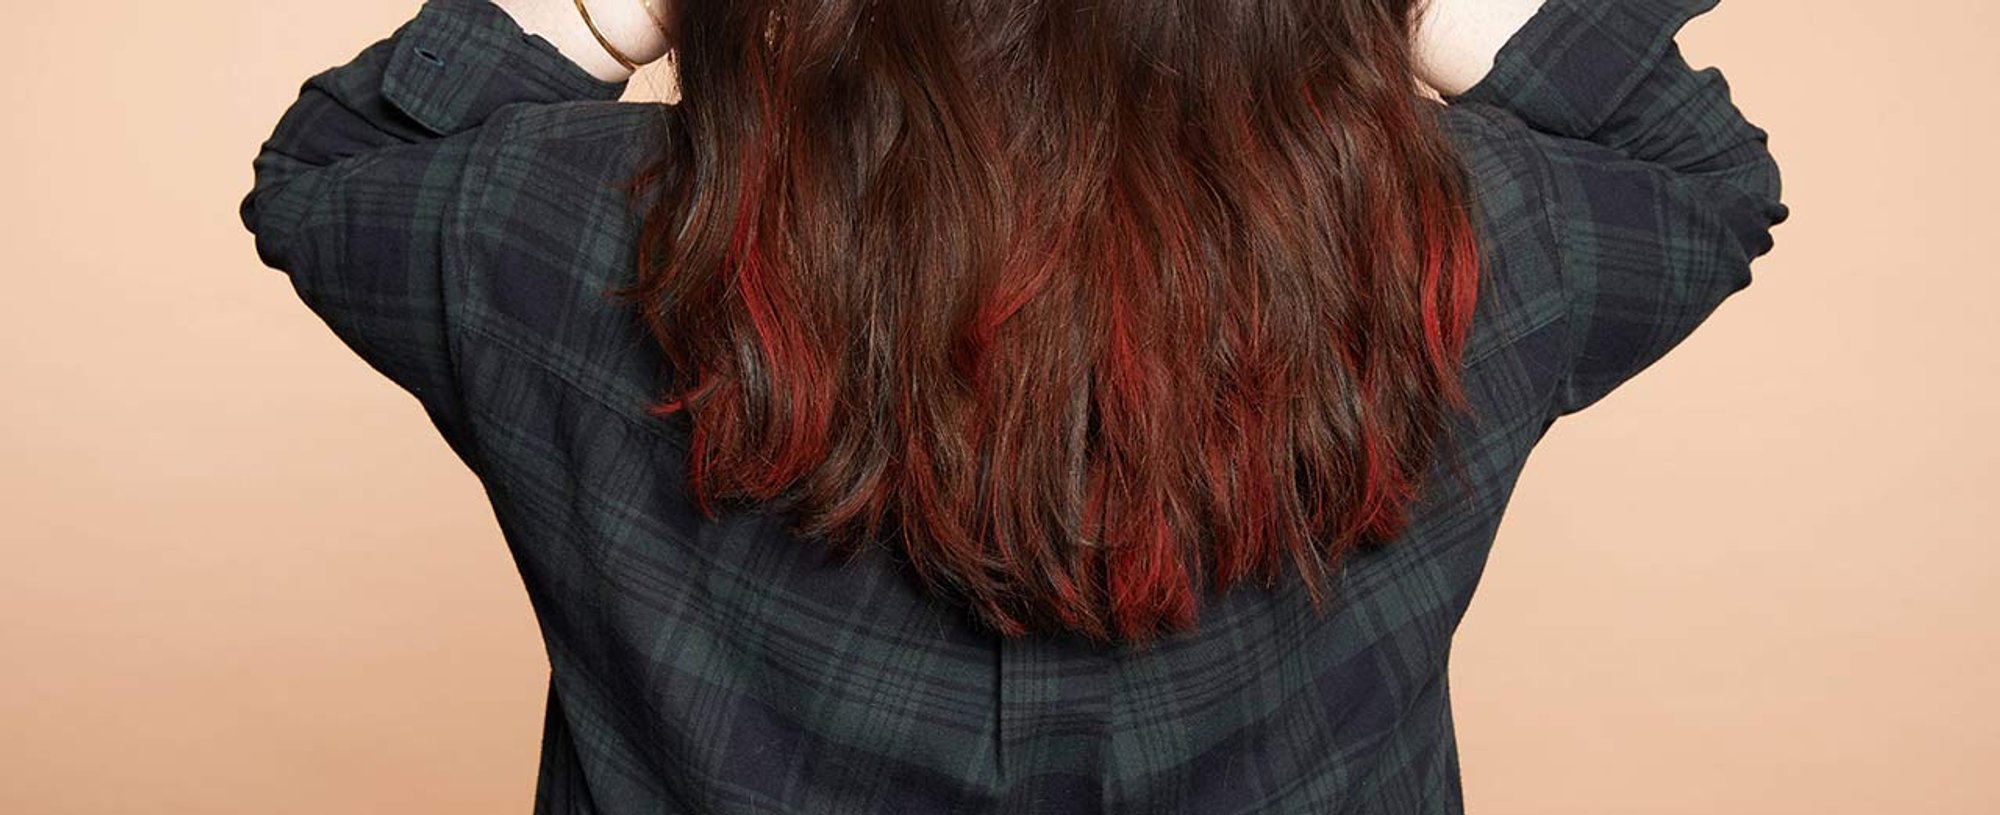 15 Gorgeous Red Ombre Hair Ideas for 2024 - The Trend Spotter